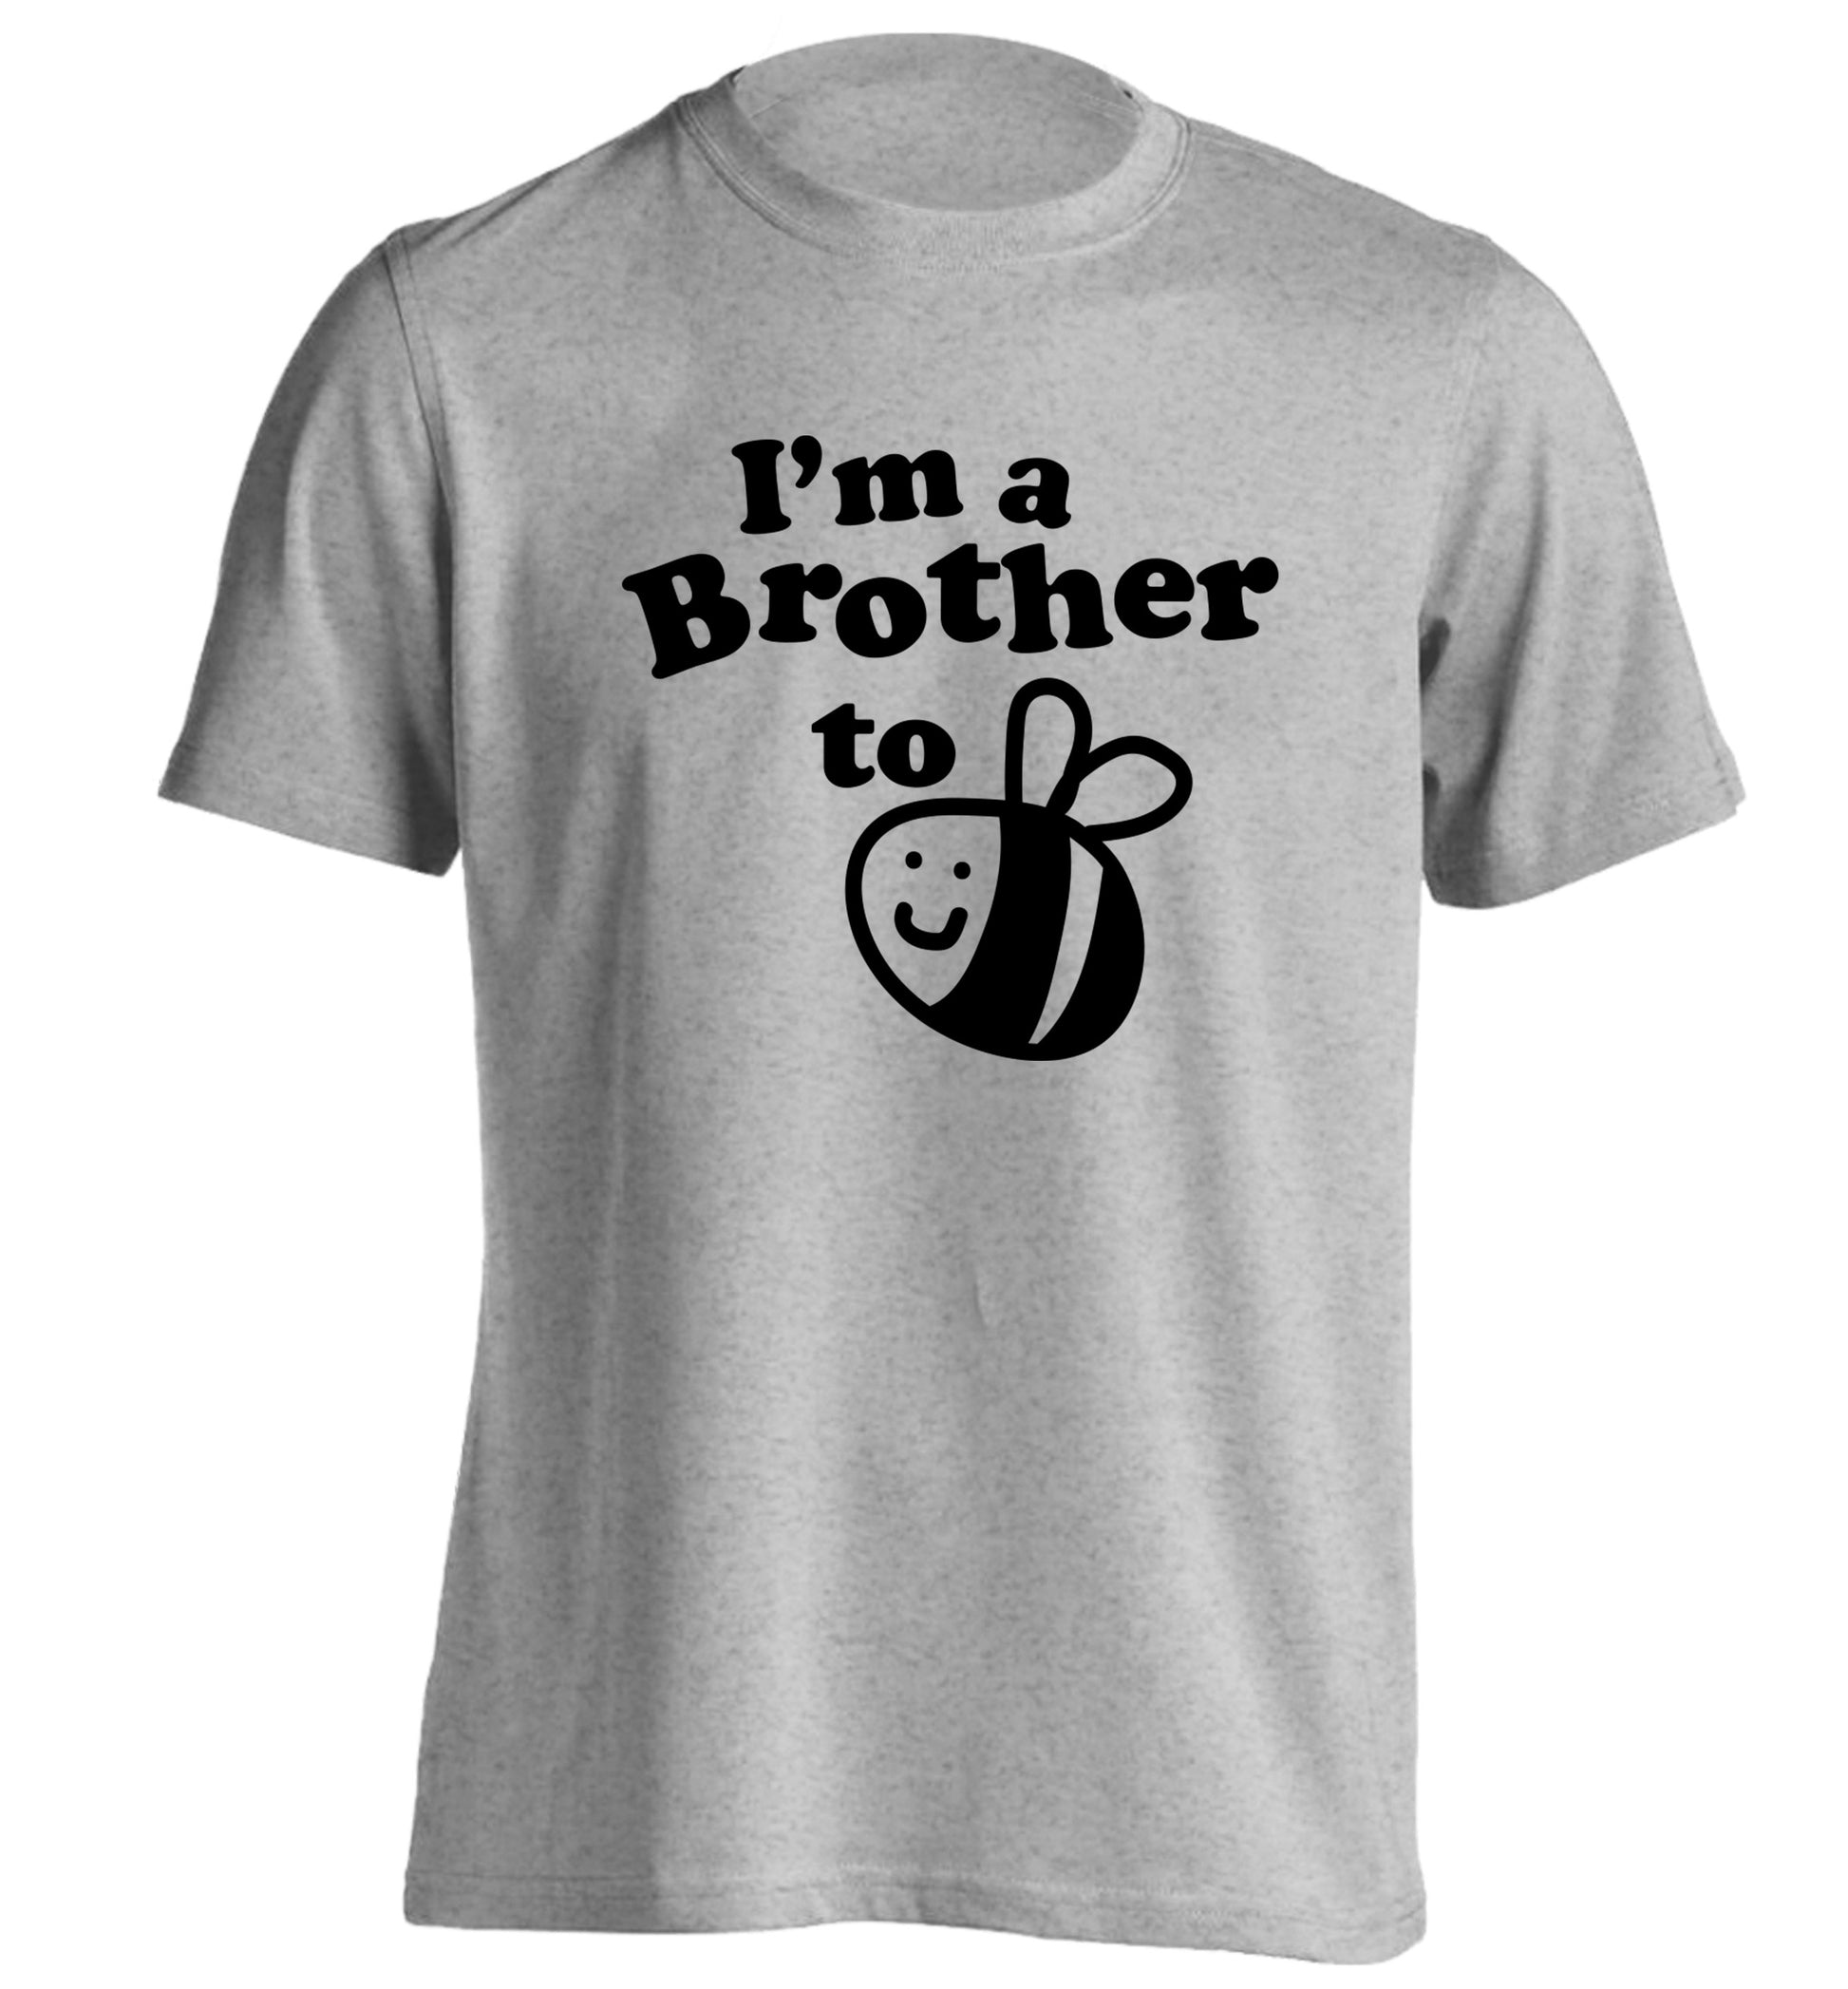 I'm a brother to be adults unisex grey Tshirt 2XL